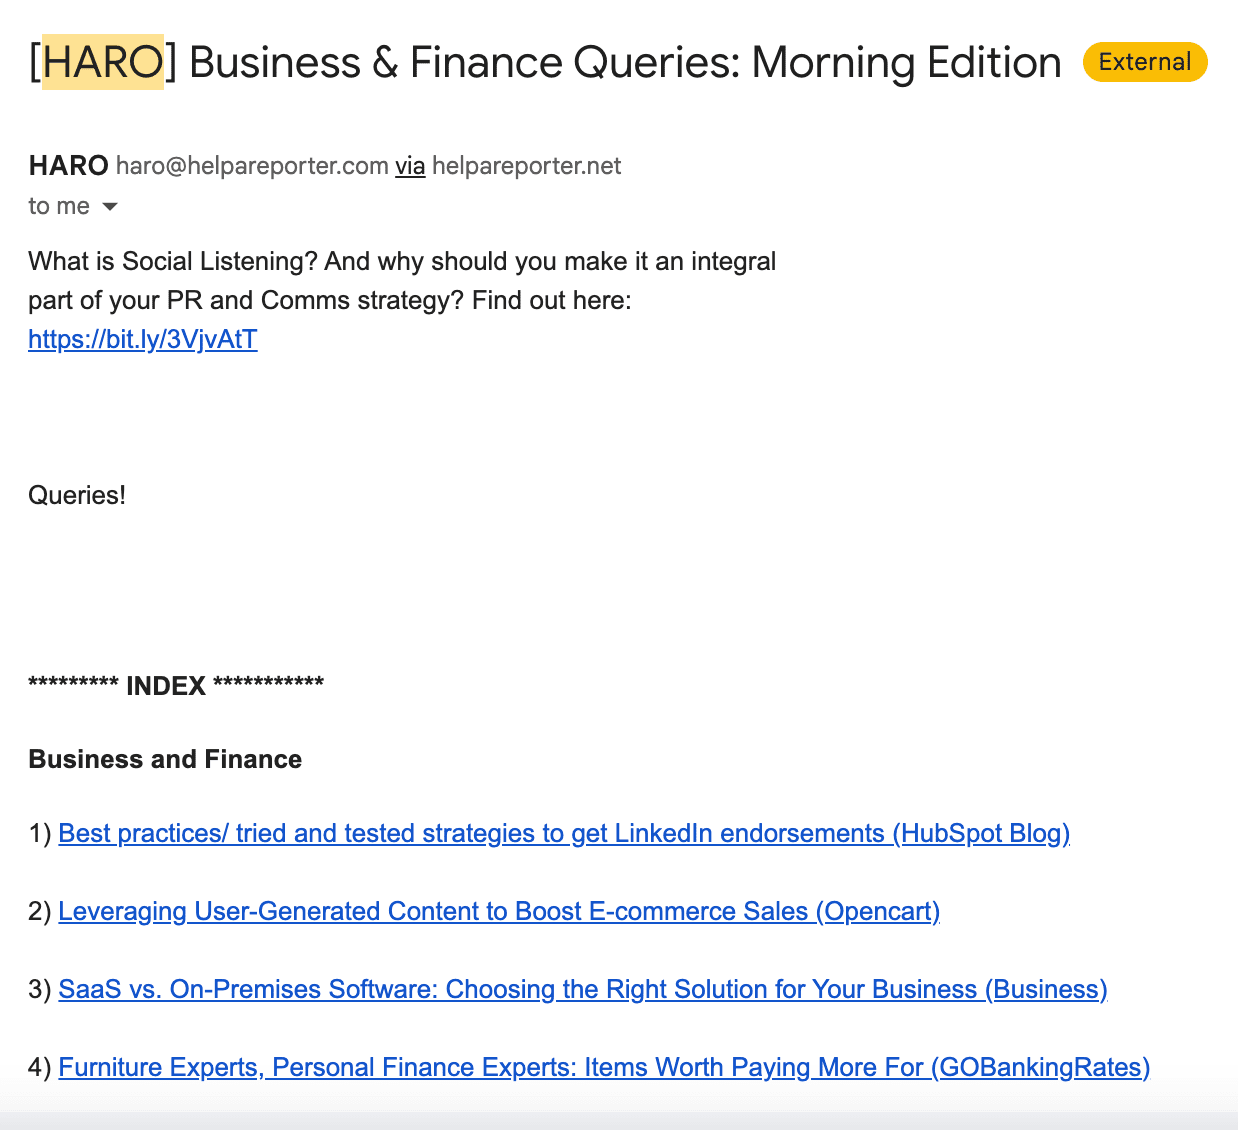 HARO email example of greeting and index